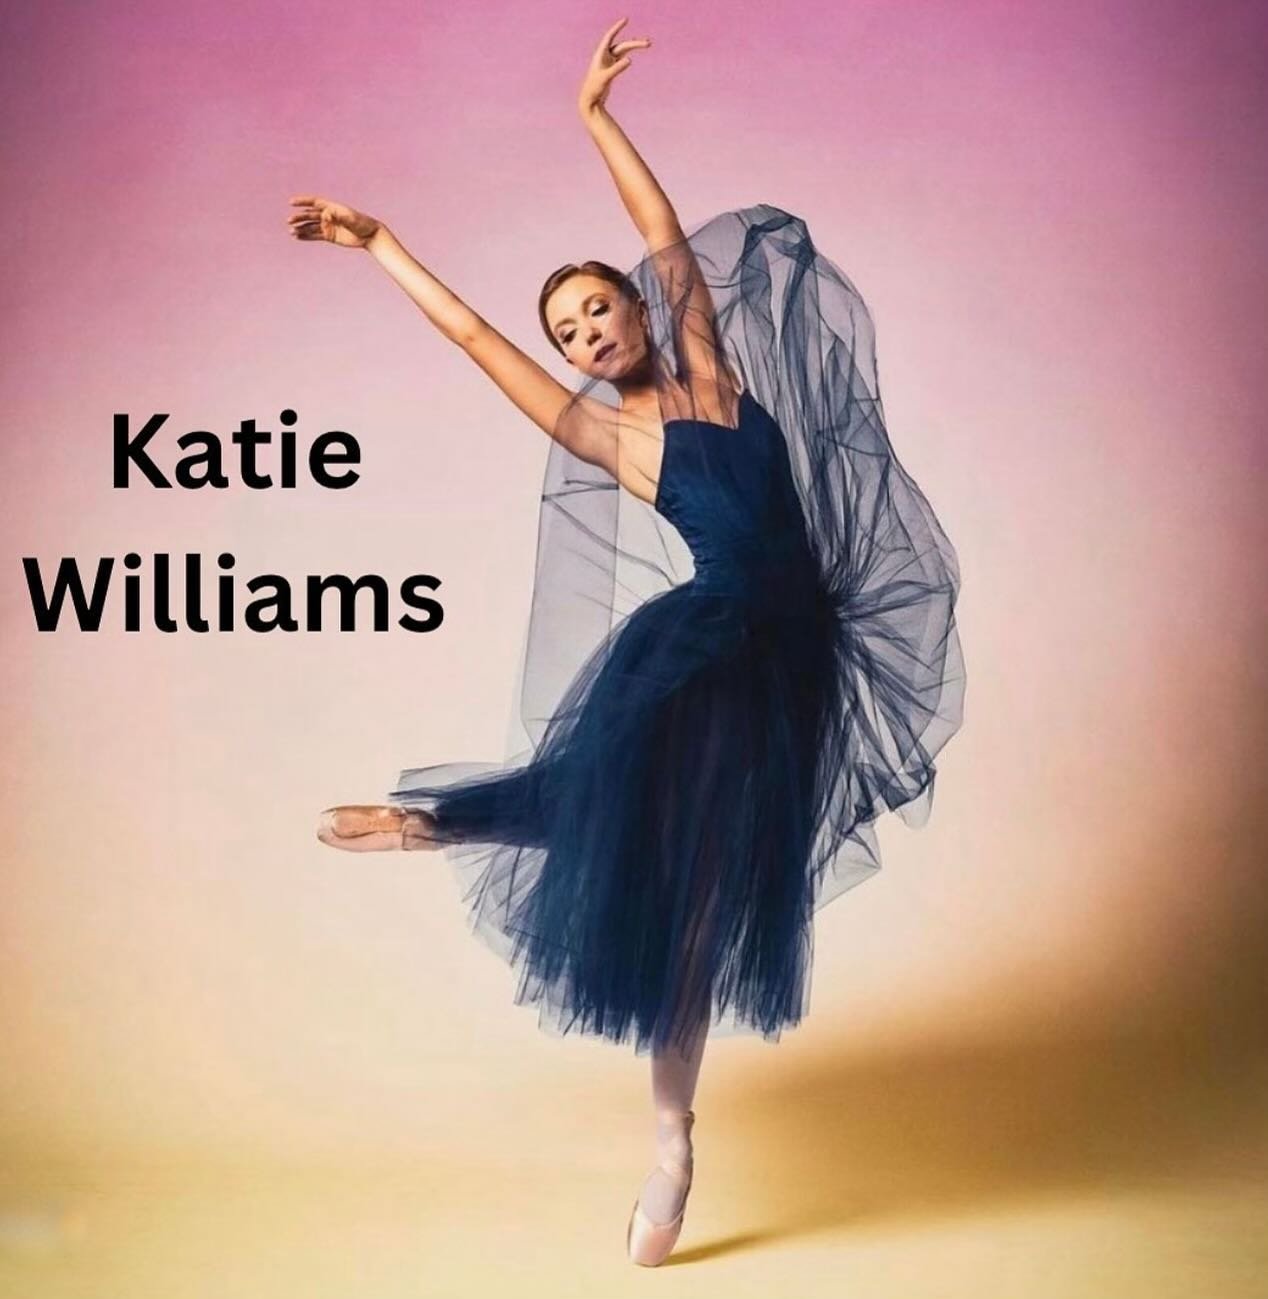 I am so excited to announce American Ballet Theatre soloist Katie Williams. Katie and I grew up at the same studio and have known each other since we were little.  Being able to watch Katie&rsquo;s career blossom has been very exciting. Her repertoir